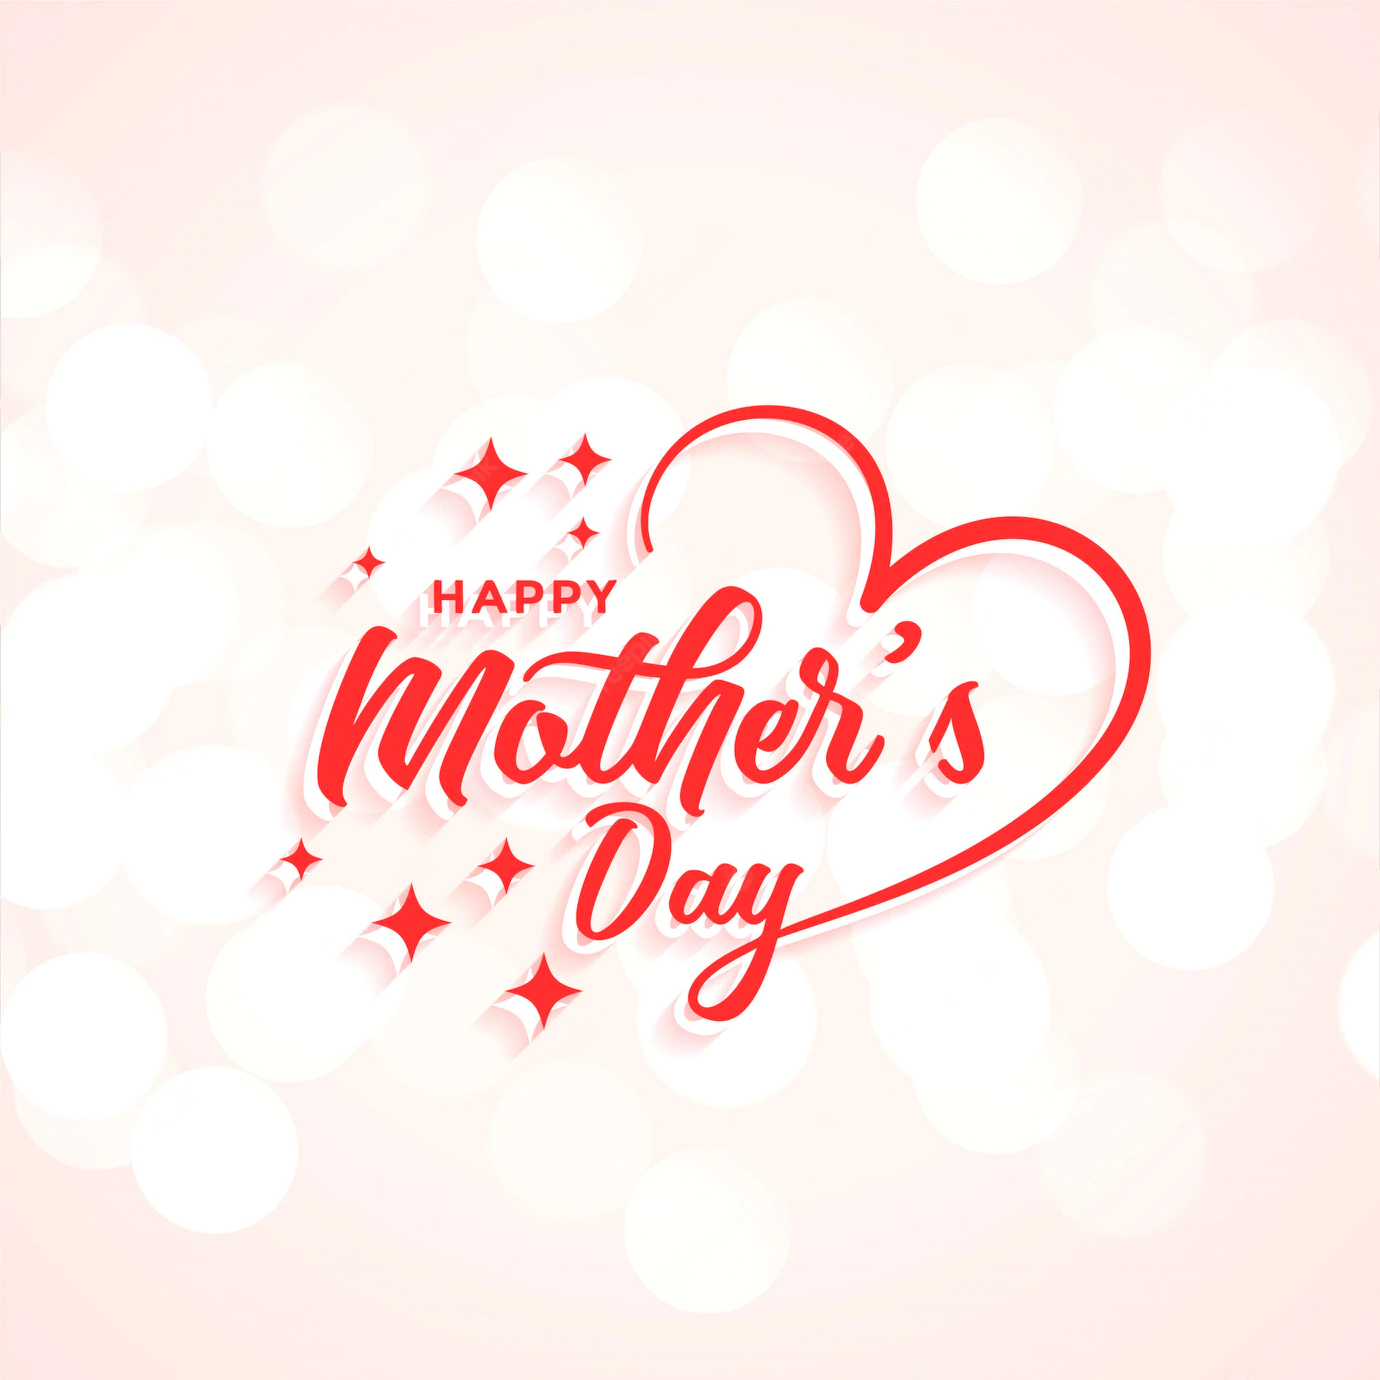 Happy Mothers Day Creative Lettering Background Design 1017 25029